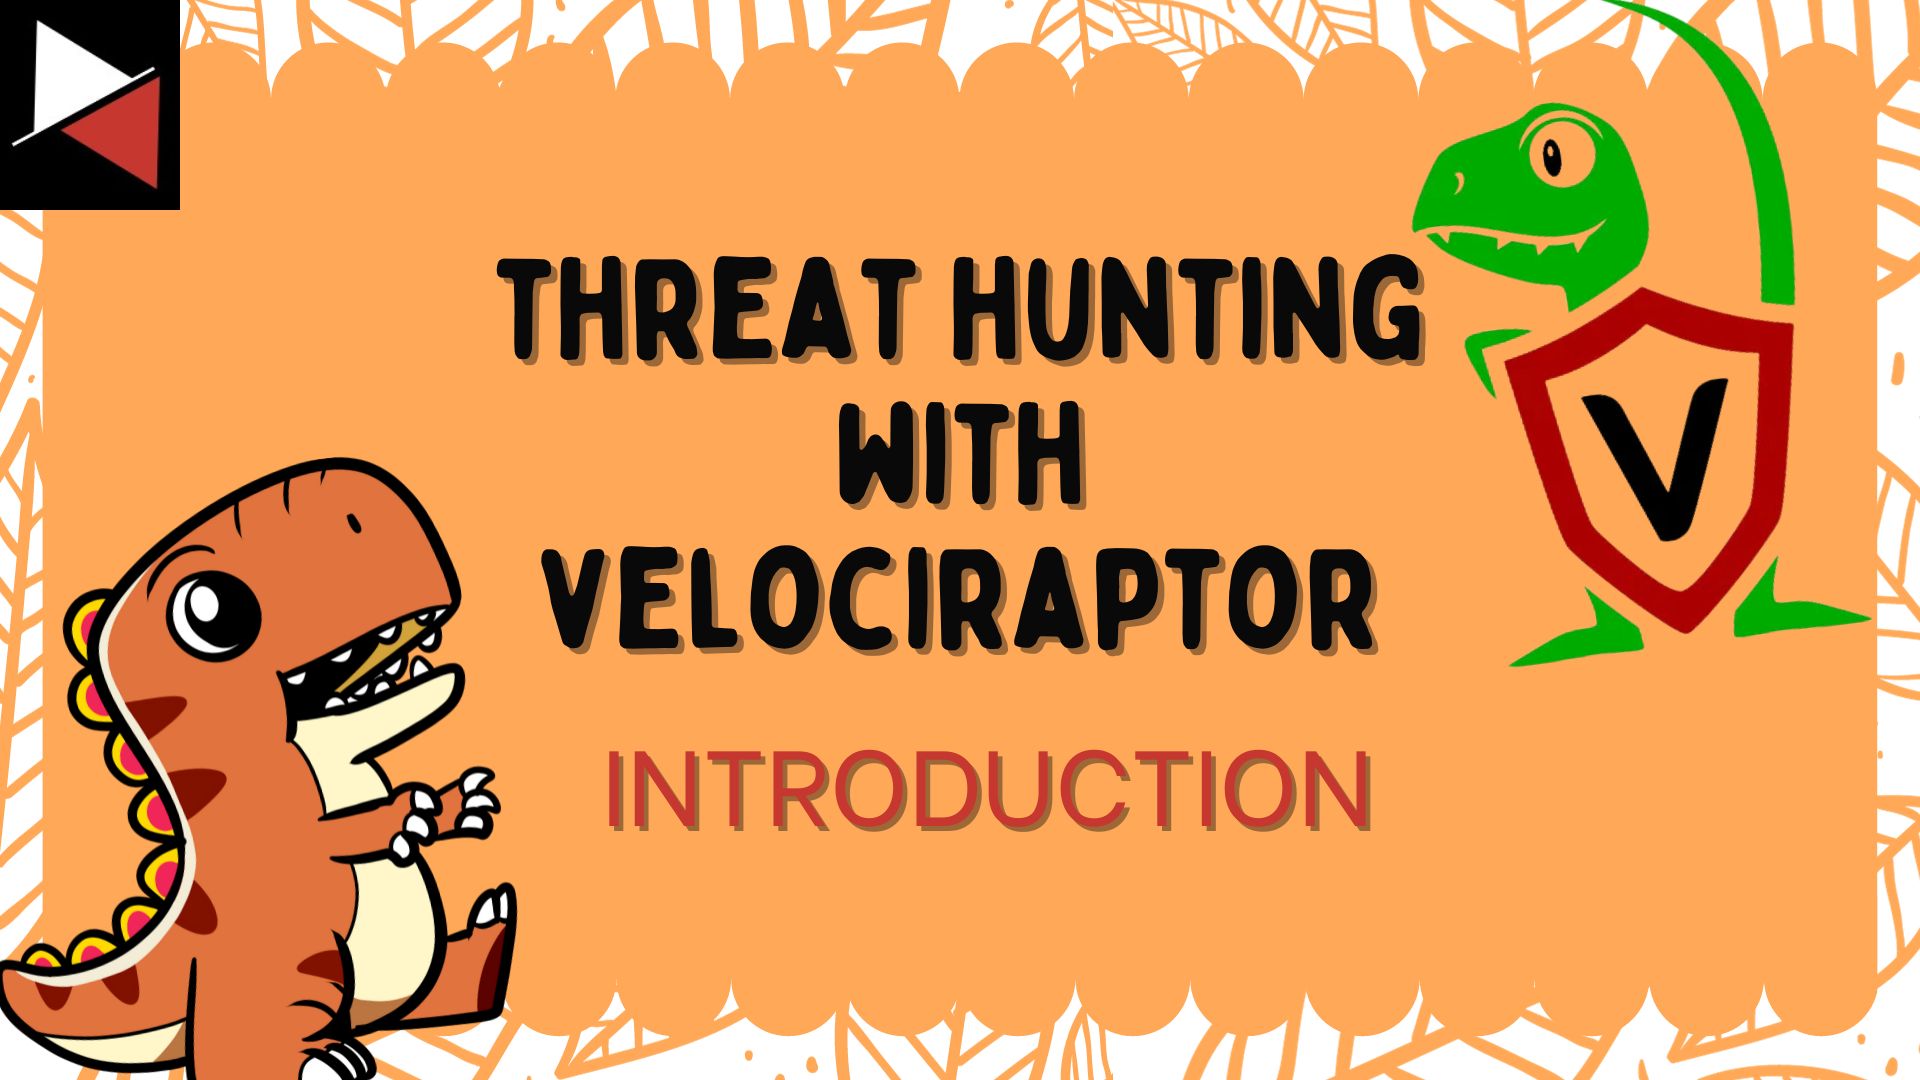 Threat Hunting With Velociraptor I - Introduction